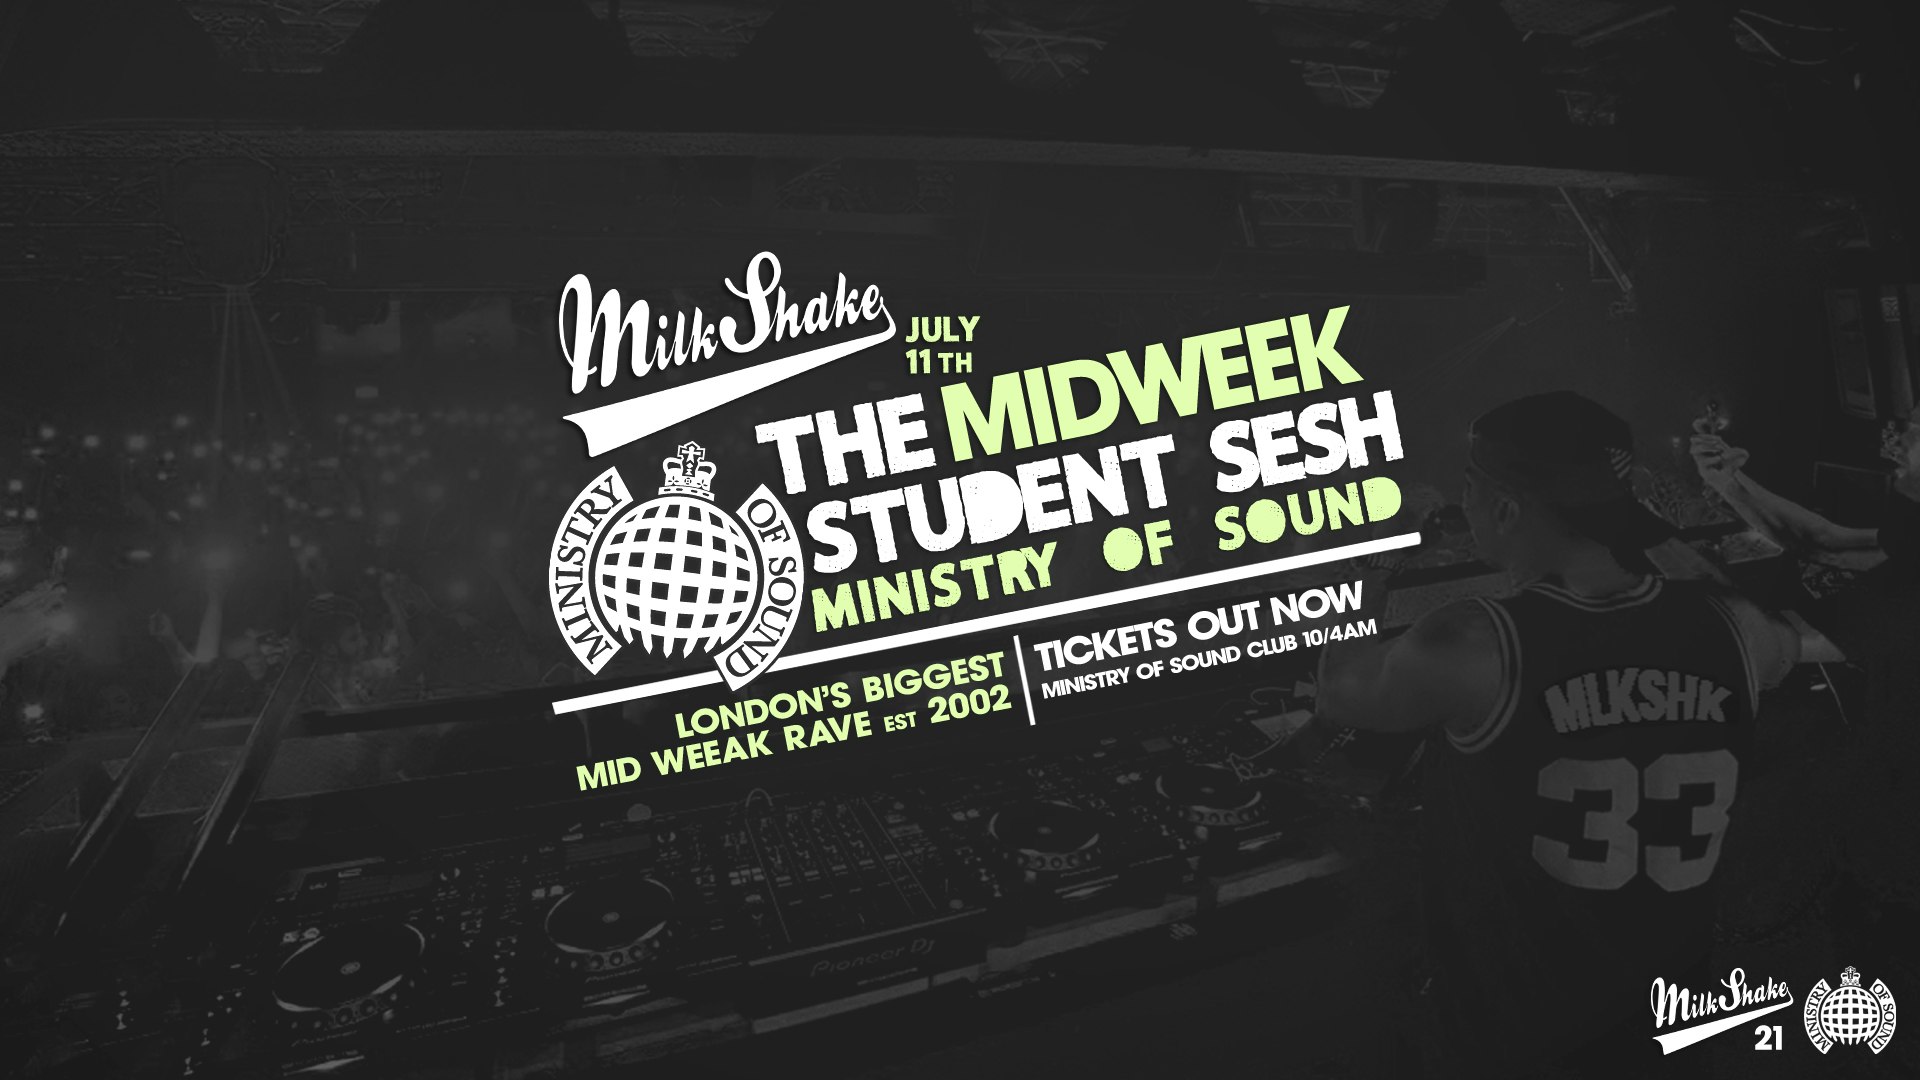 ⛔️ SOLD OUT⛔️ Milkshake, Ministry of Sound | London’s Biggest Student Night  ⛔️ SOLD OUT⛔️